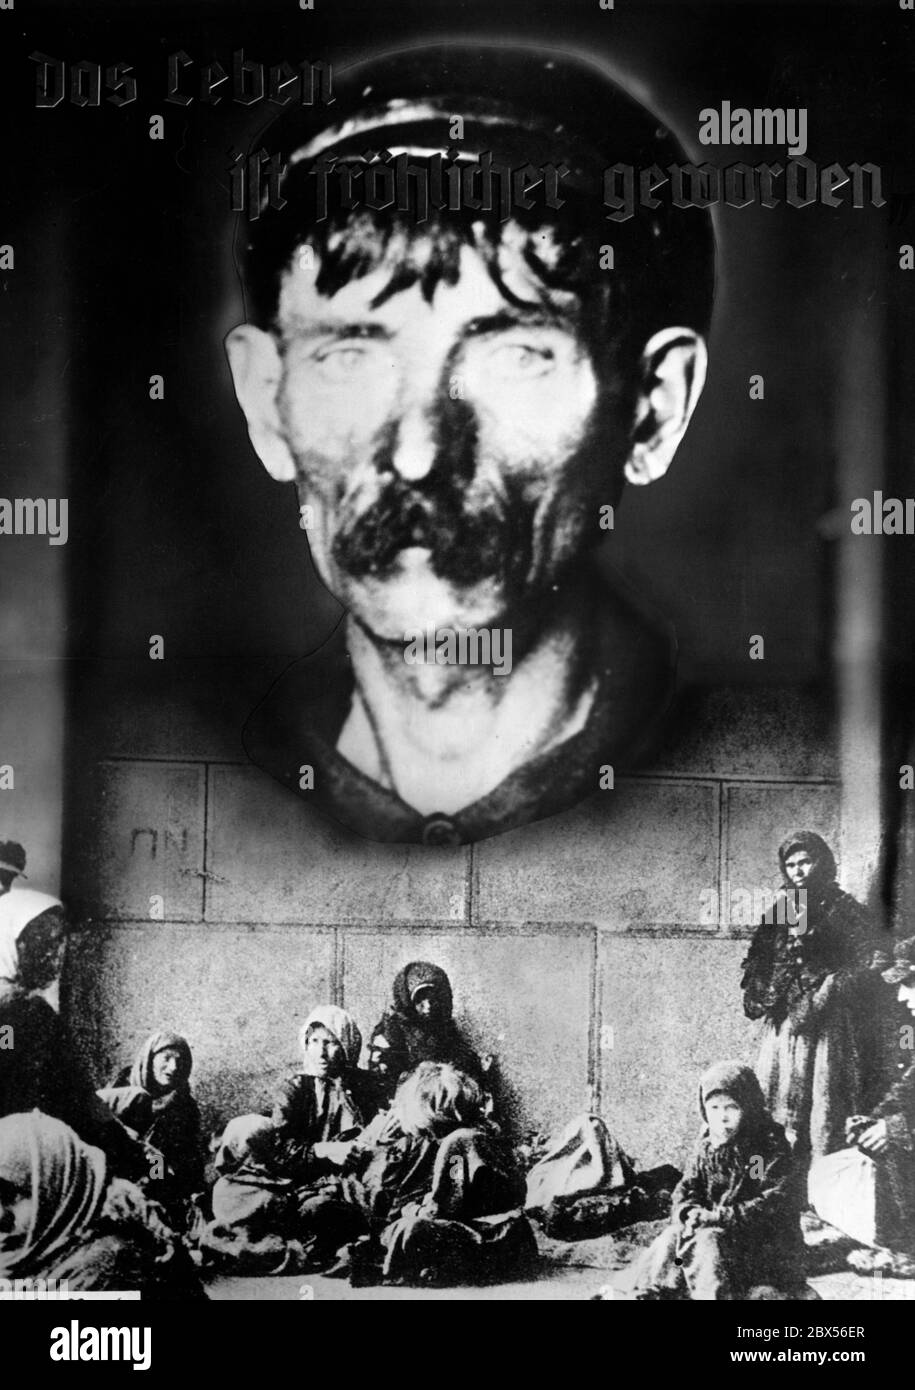 Display board of the anti-Bolshevik exhibition 'Bolschewismus ohne Maske' (Bolshevism without Mask) in the Berlin Reichstag. The infographics contrasts a motto of Stalin with children suffering from hunger in a propagandistic way. Stock Photo